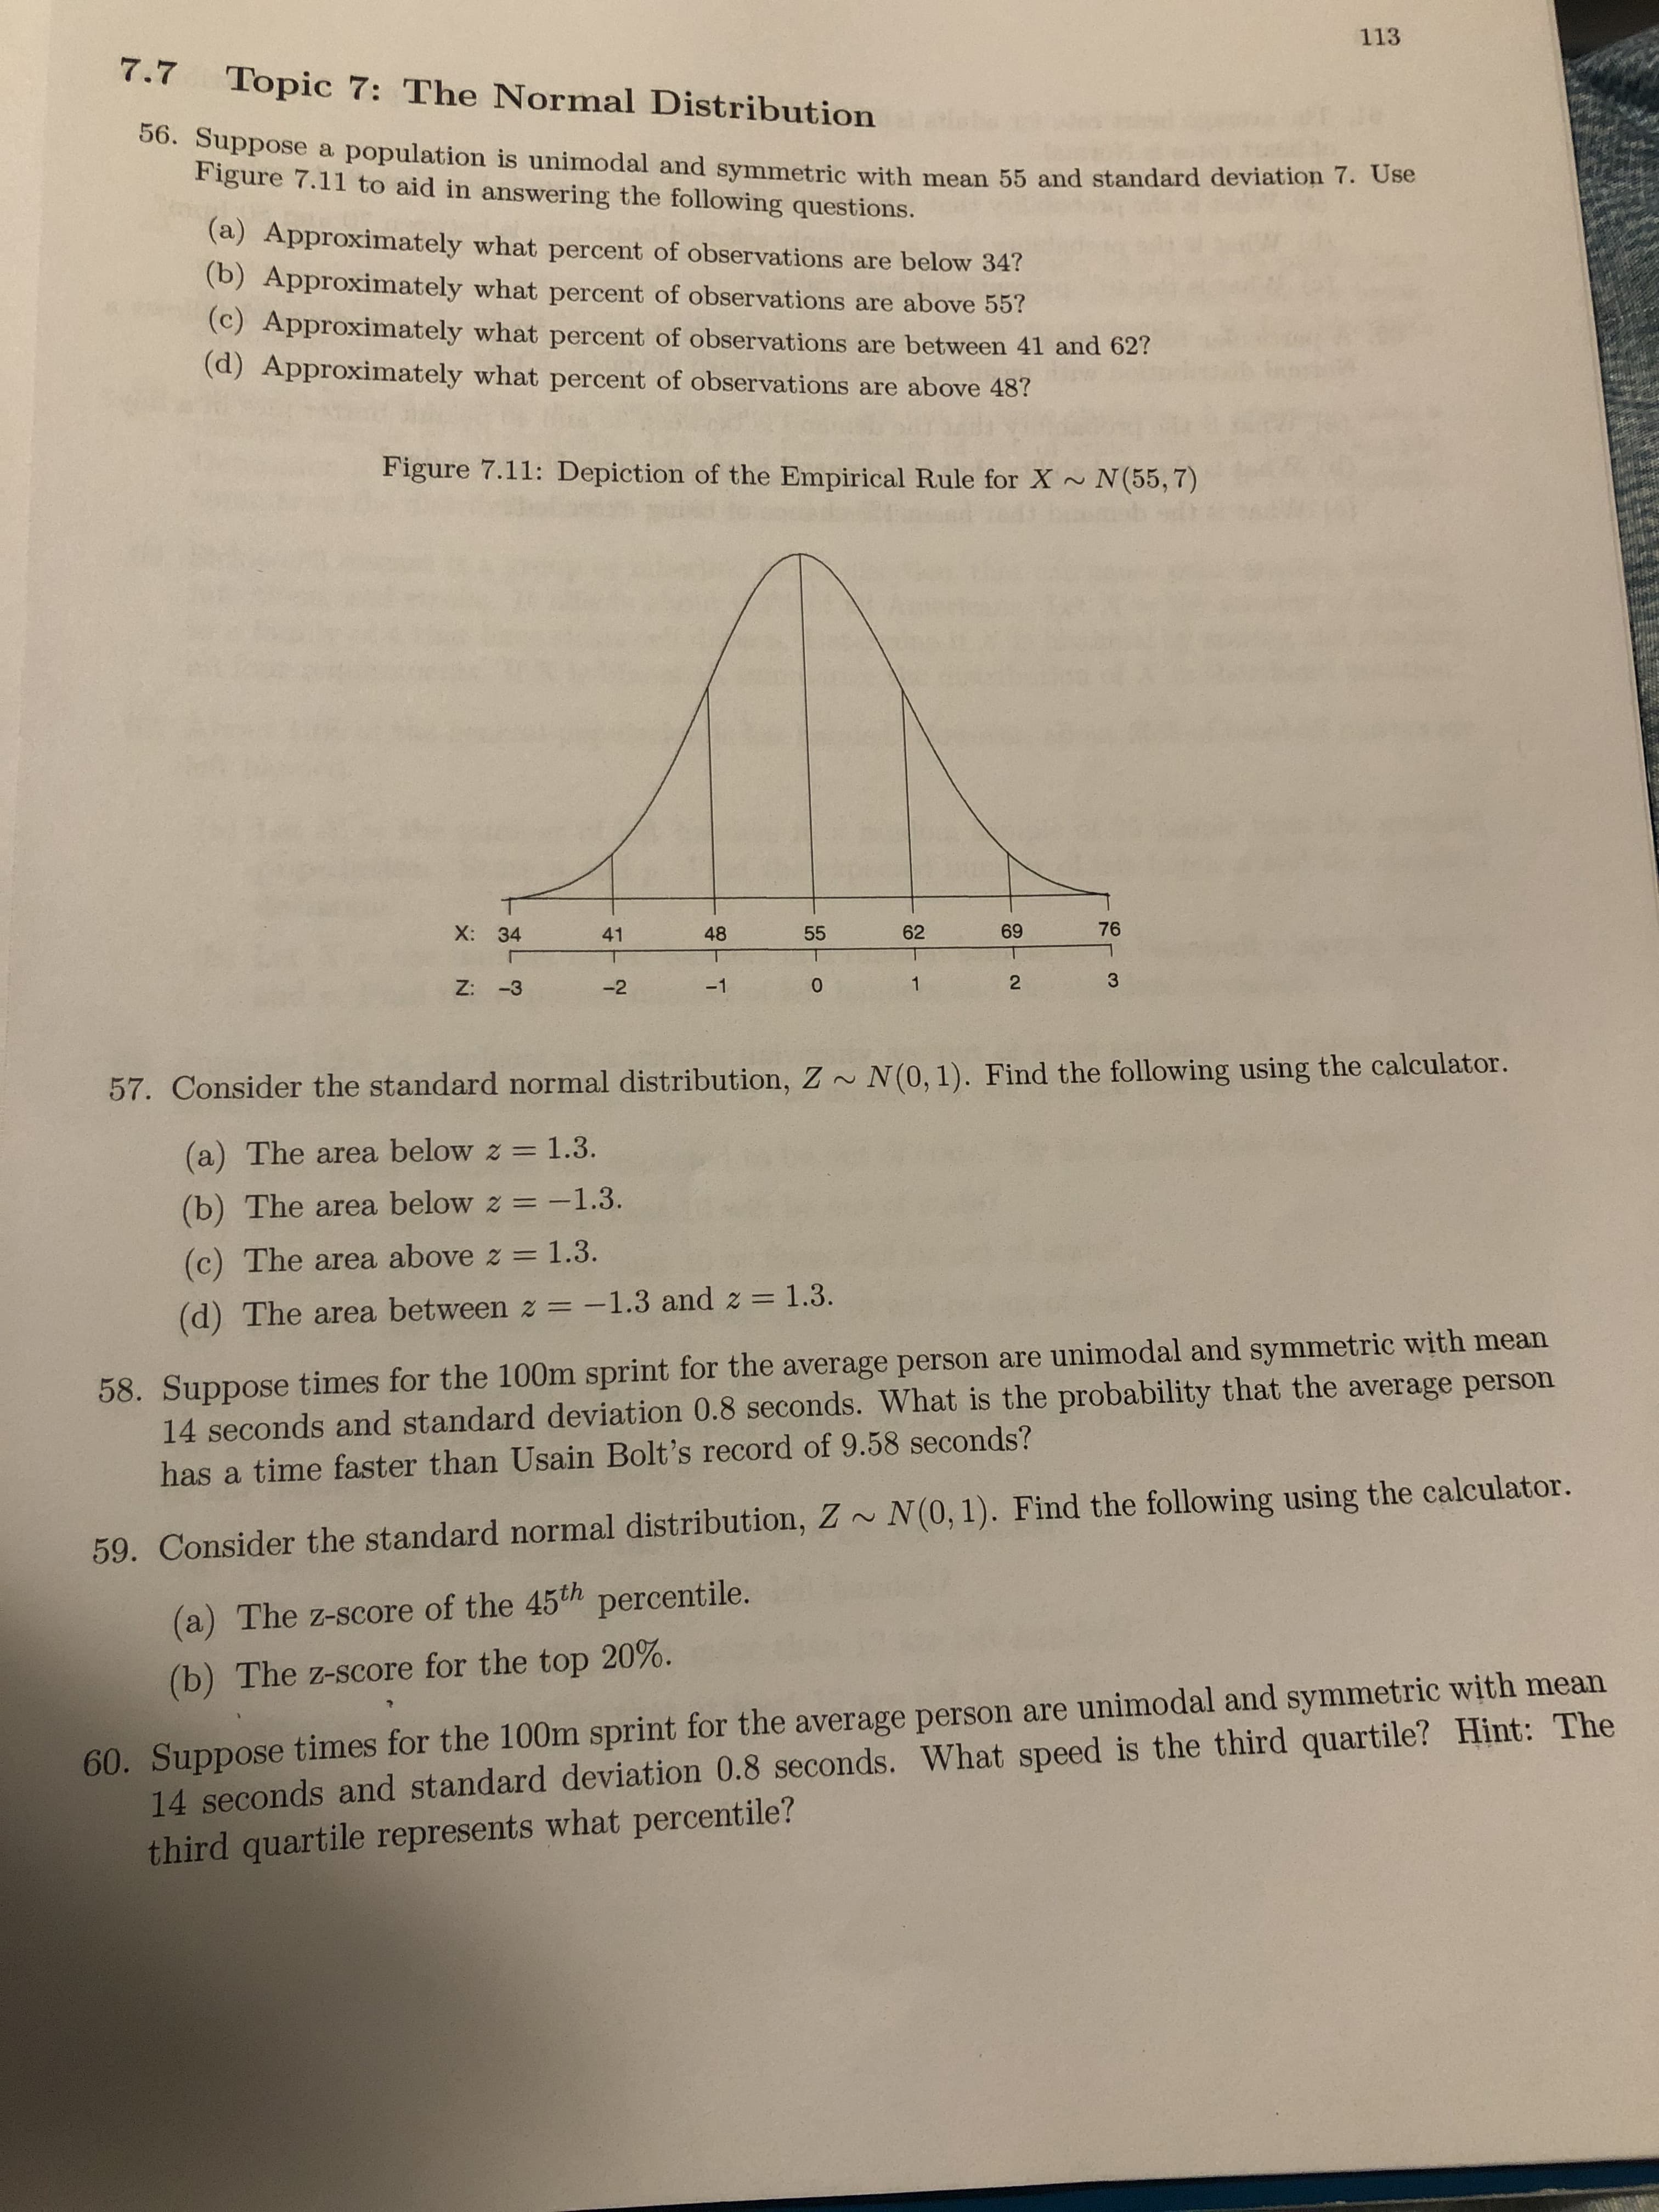 113
7.7
Topic 7: The Normal Distribution
00. Suppose a population is unimodal and symmetric with mean 55 and standard deviation 7. Use
Figure 7.11 to aid in answering the following questions.
(a) Approximately what percent of observations are below 34?
(b) Approximately what percent of observations are above 55?
(c) Approximately what percent of observations are between 41 and 62?
(d) Approximately what percent of observations are above 48?
Figure 7.11: Depiction of the Empirical Rule for X N(55, 7)
X: 34
41
48
55
62
69
76
Z: -3
-2
-1
2
57. Consider the standard normal distribution, Z ~ N(0, 1). Find the following using the calculator.
(a) The area below z = 1.3.
(b) The area below z =-1.3.
(c) The area above z = 1.3.
%3D
(d) The area between z = -1.3 and z = 1.3.
58. Suppose times for the 100m sprint for the average person are unimodal and symmetric with mean
14 seconds and standard deviation 0.8 seconds. What is the probability that the average person
has a time faster than Usain Bolt's record of 9.58 seconds?
59. Consider the standard normal distribution, Z ~ N(0, 1). Find the following using the calculator.
(a) The z-score of the 45th percentile.
60. Suppose times for the 100m sprint for the average person are unimodal and symmetric with mean
14 seconds and standard deviation 0.8 seconds. What speed is the third quartile? Hint: The
third quartile represents what percentile?
(b) The z-score for the top 20%.
3.
